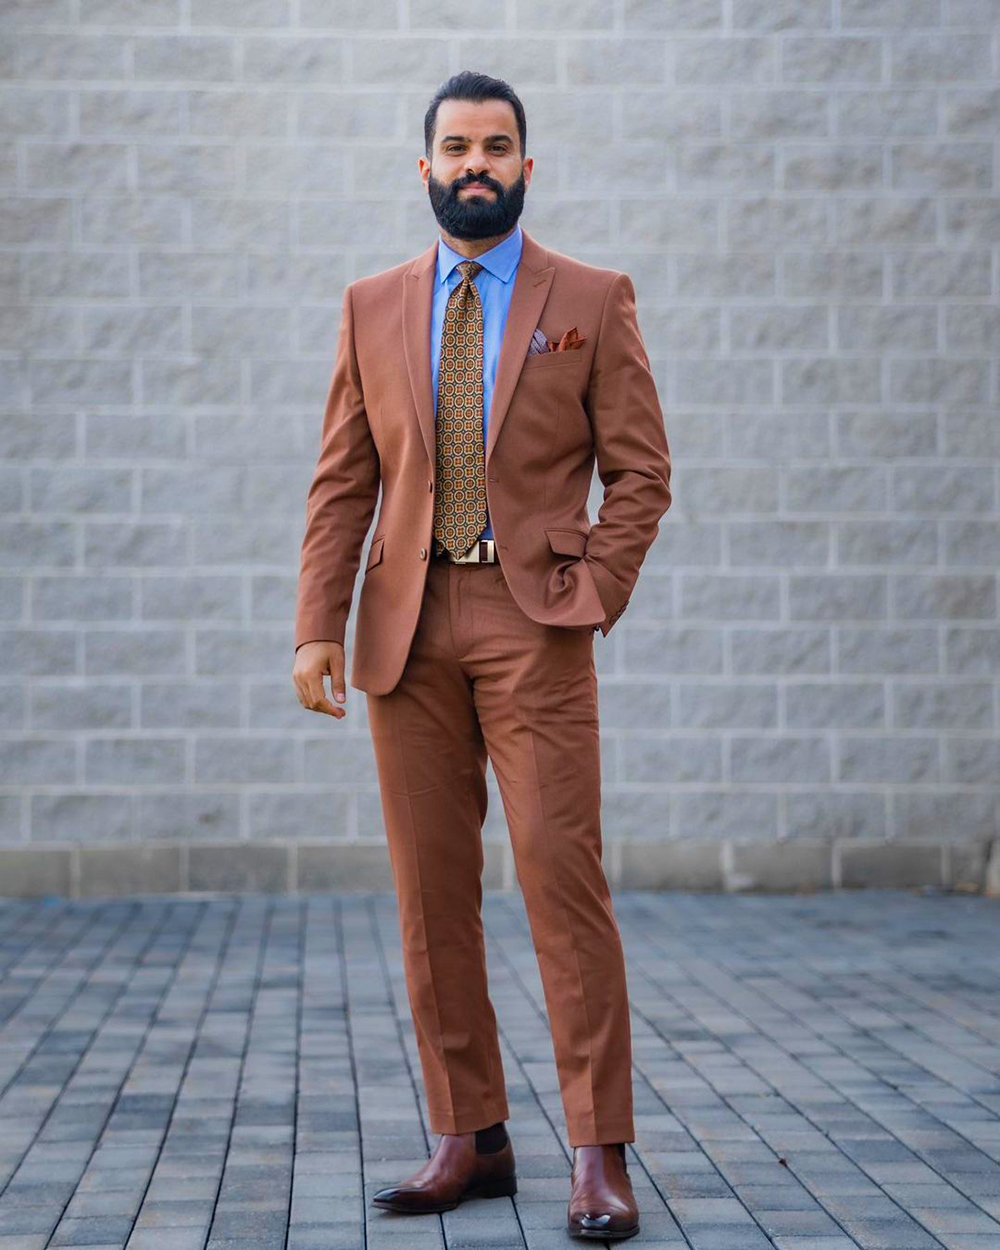 Brown suit with light blue shirt and Chelsea boots outfit